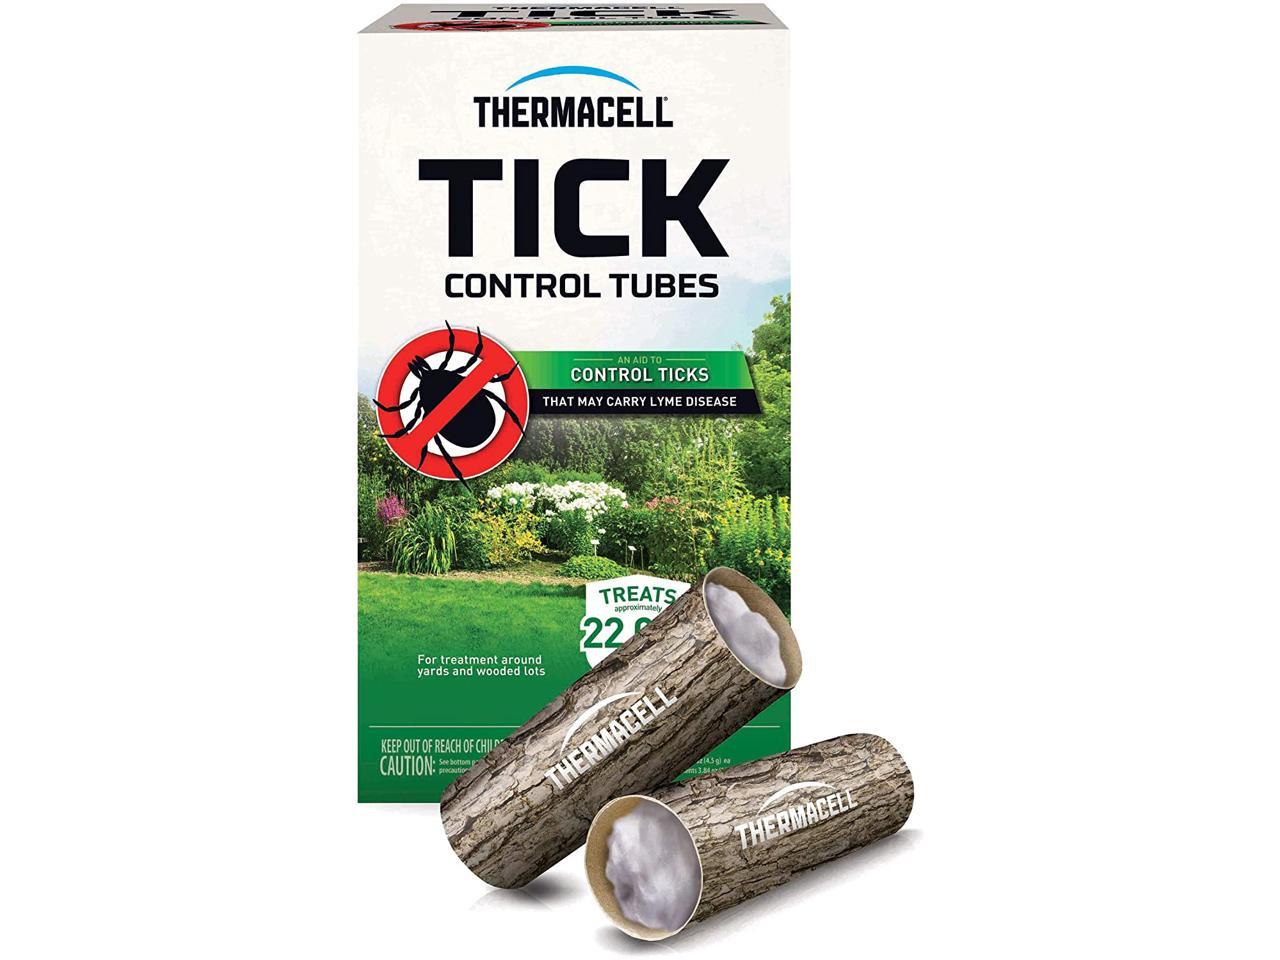 Thermacell Tick Control Tubes; 24 Per Box; No Spray Easy-to-Use; Kills Ticks That May Carry Lyme Disease; Won’t Harm Kids Pets or Environment. 